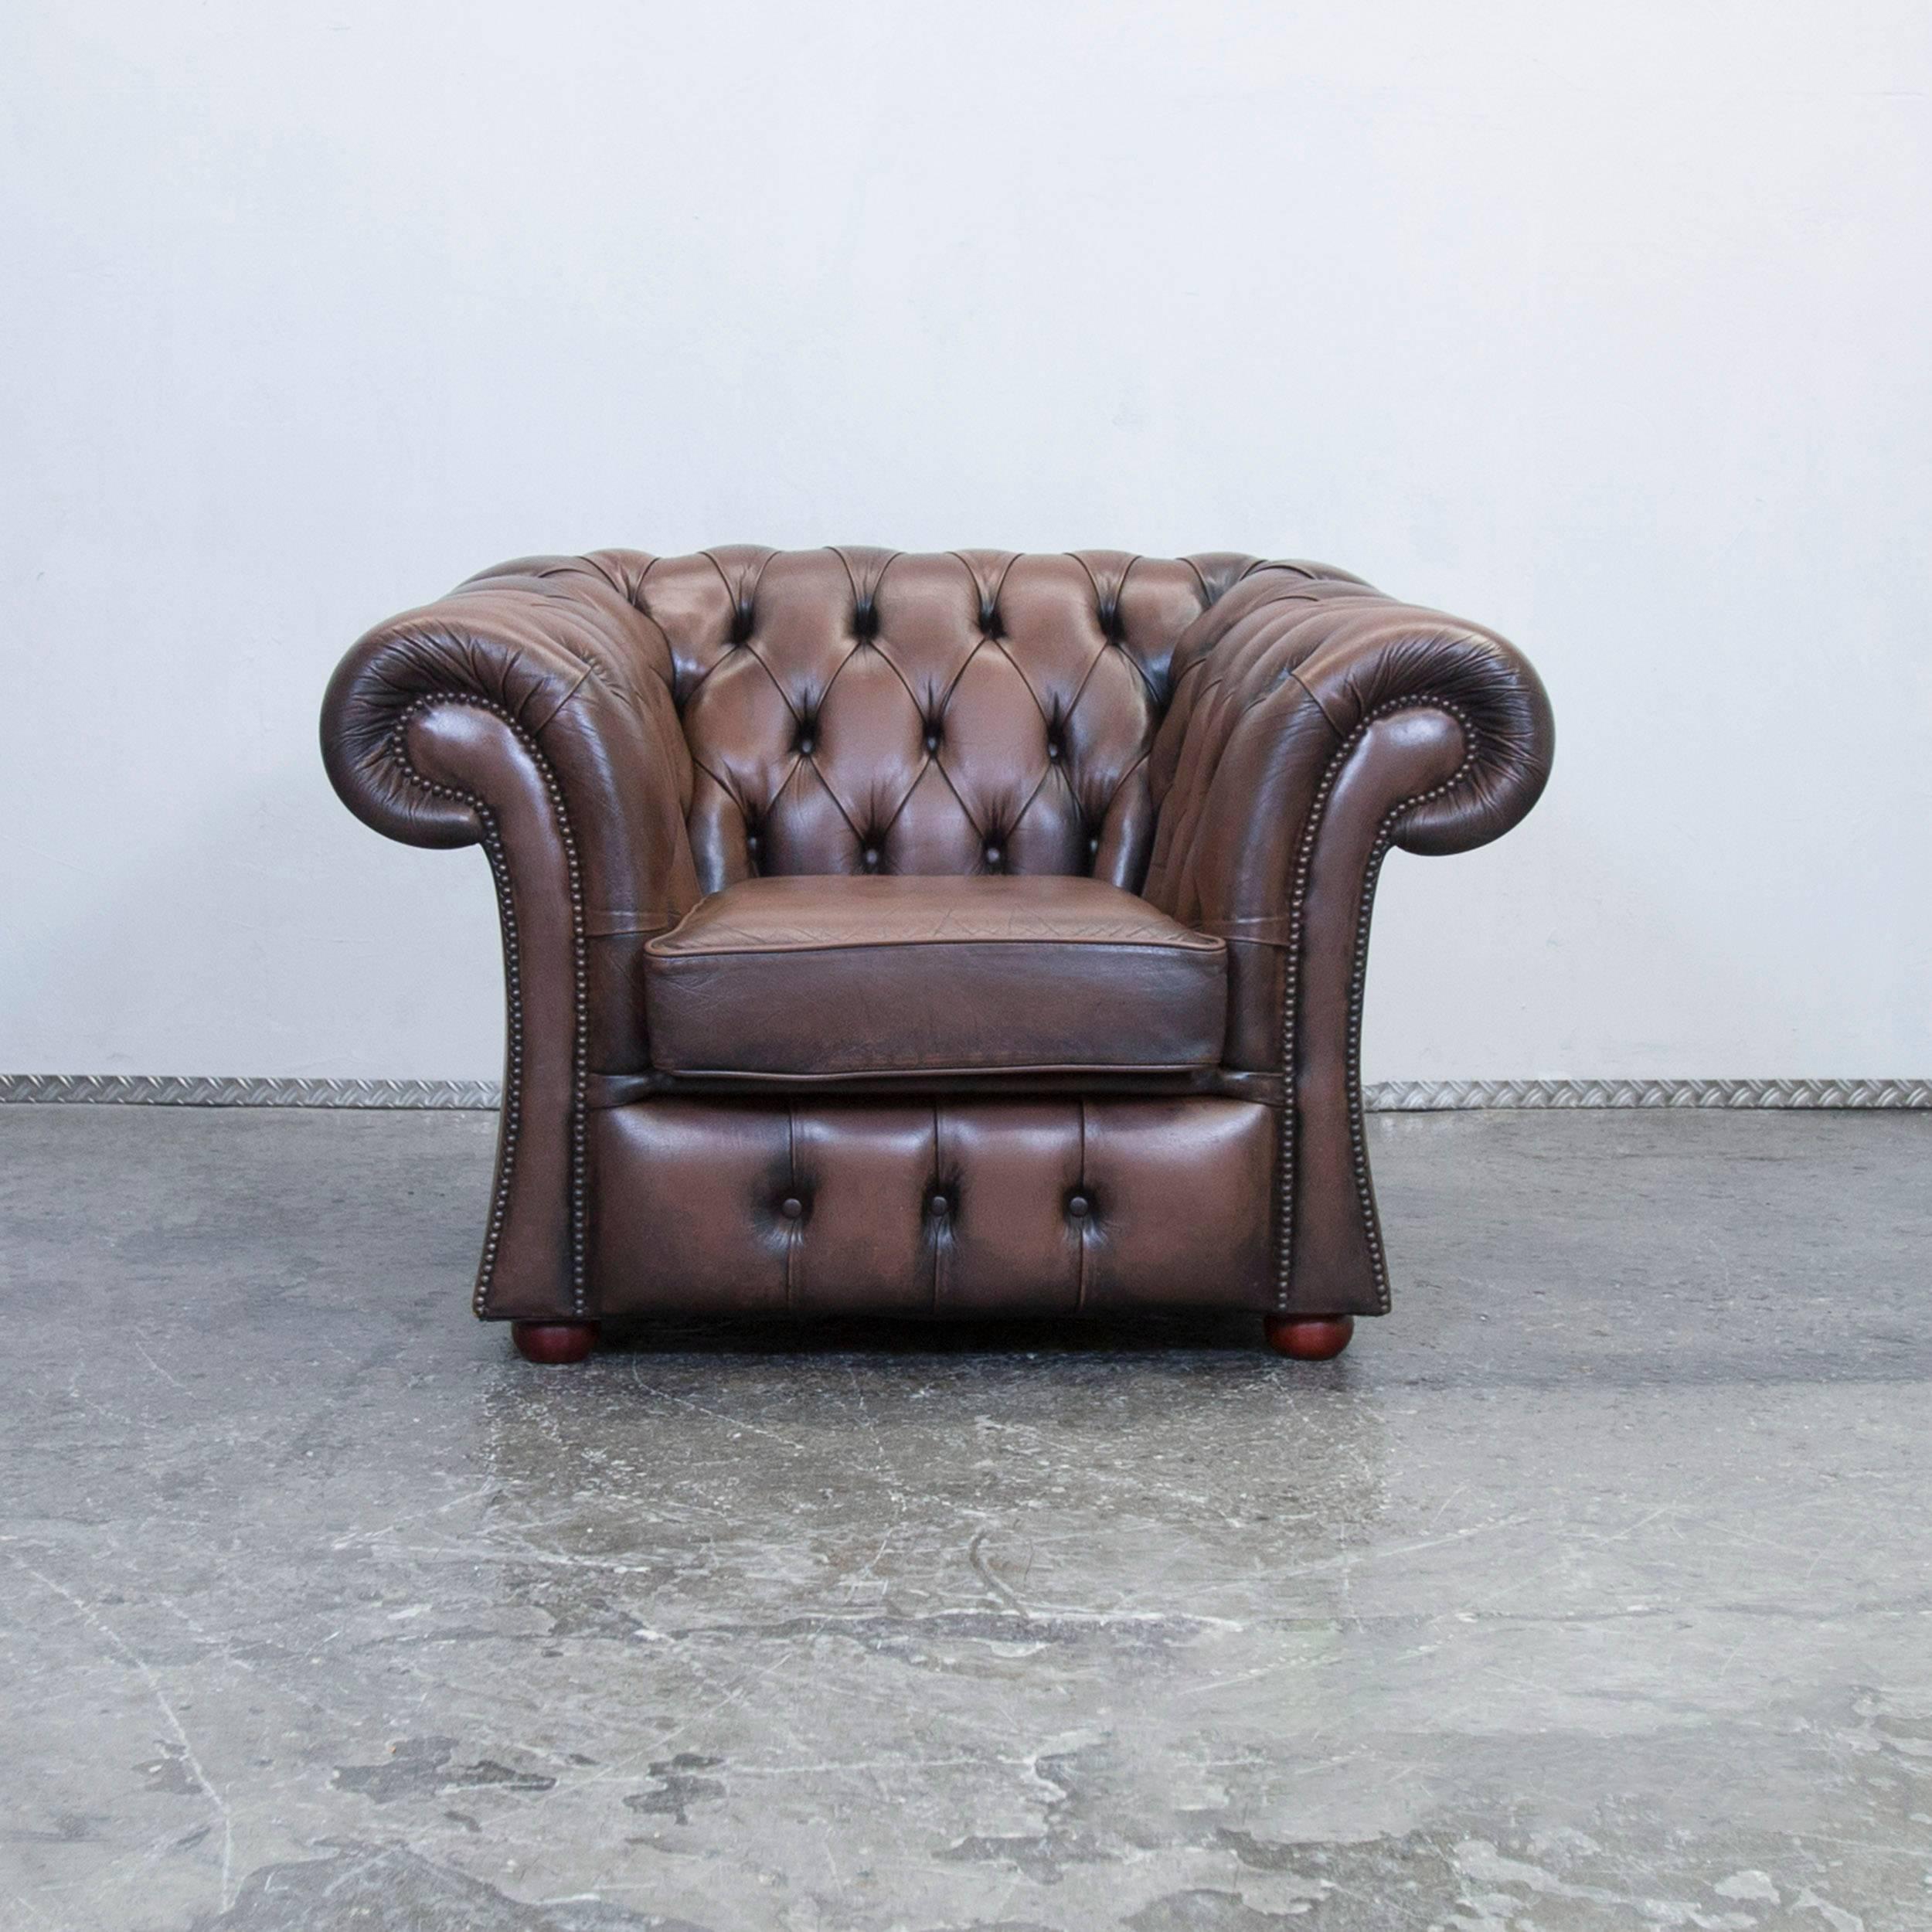 Brown colored Chesterfield leather armchair in a vintage design, made for pure comfort and elegance.